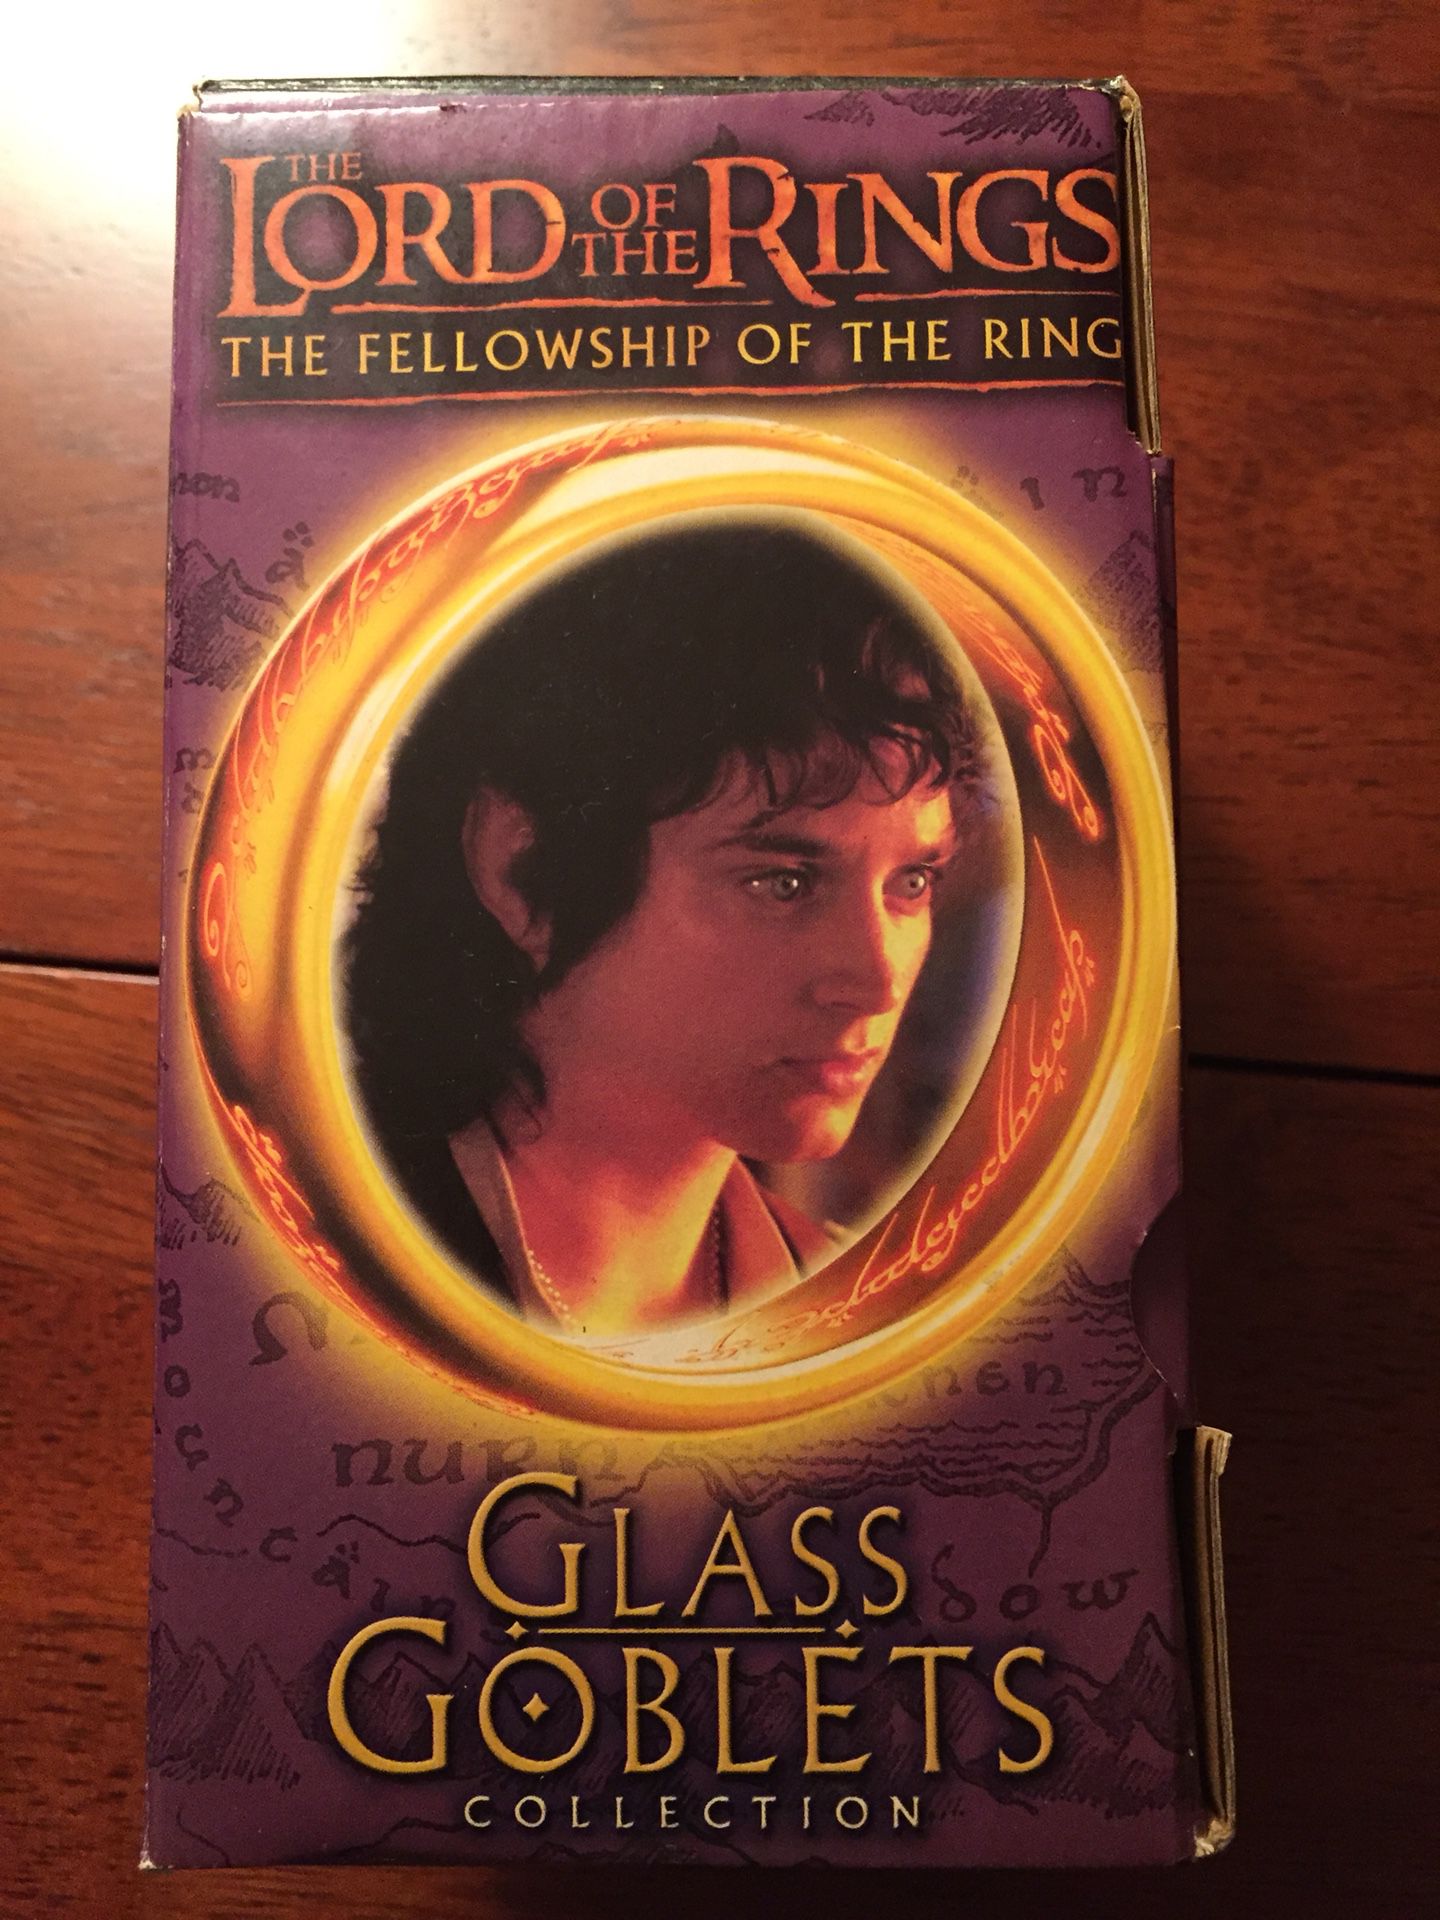 Lord of the Rings Frodo glass goblet, new in Box